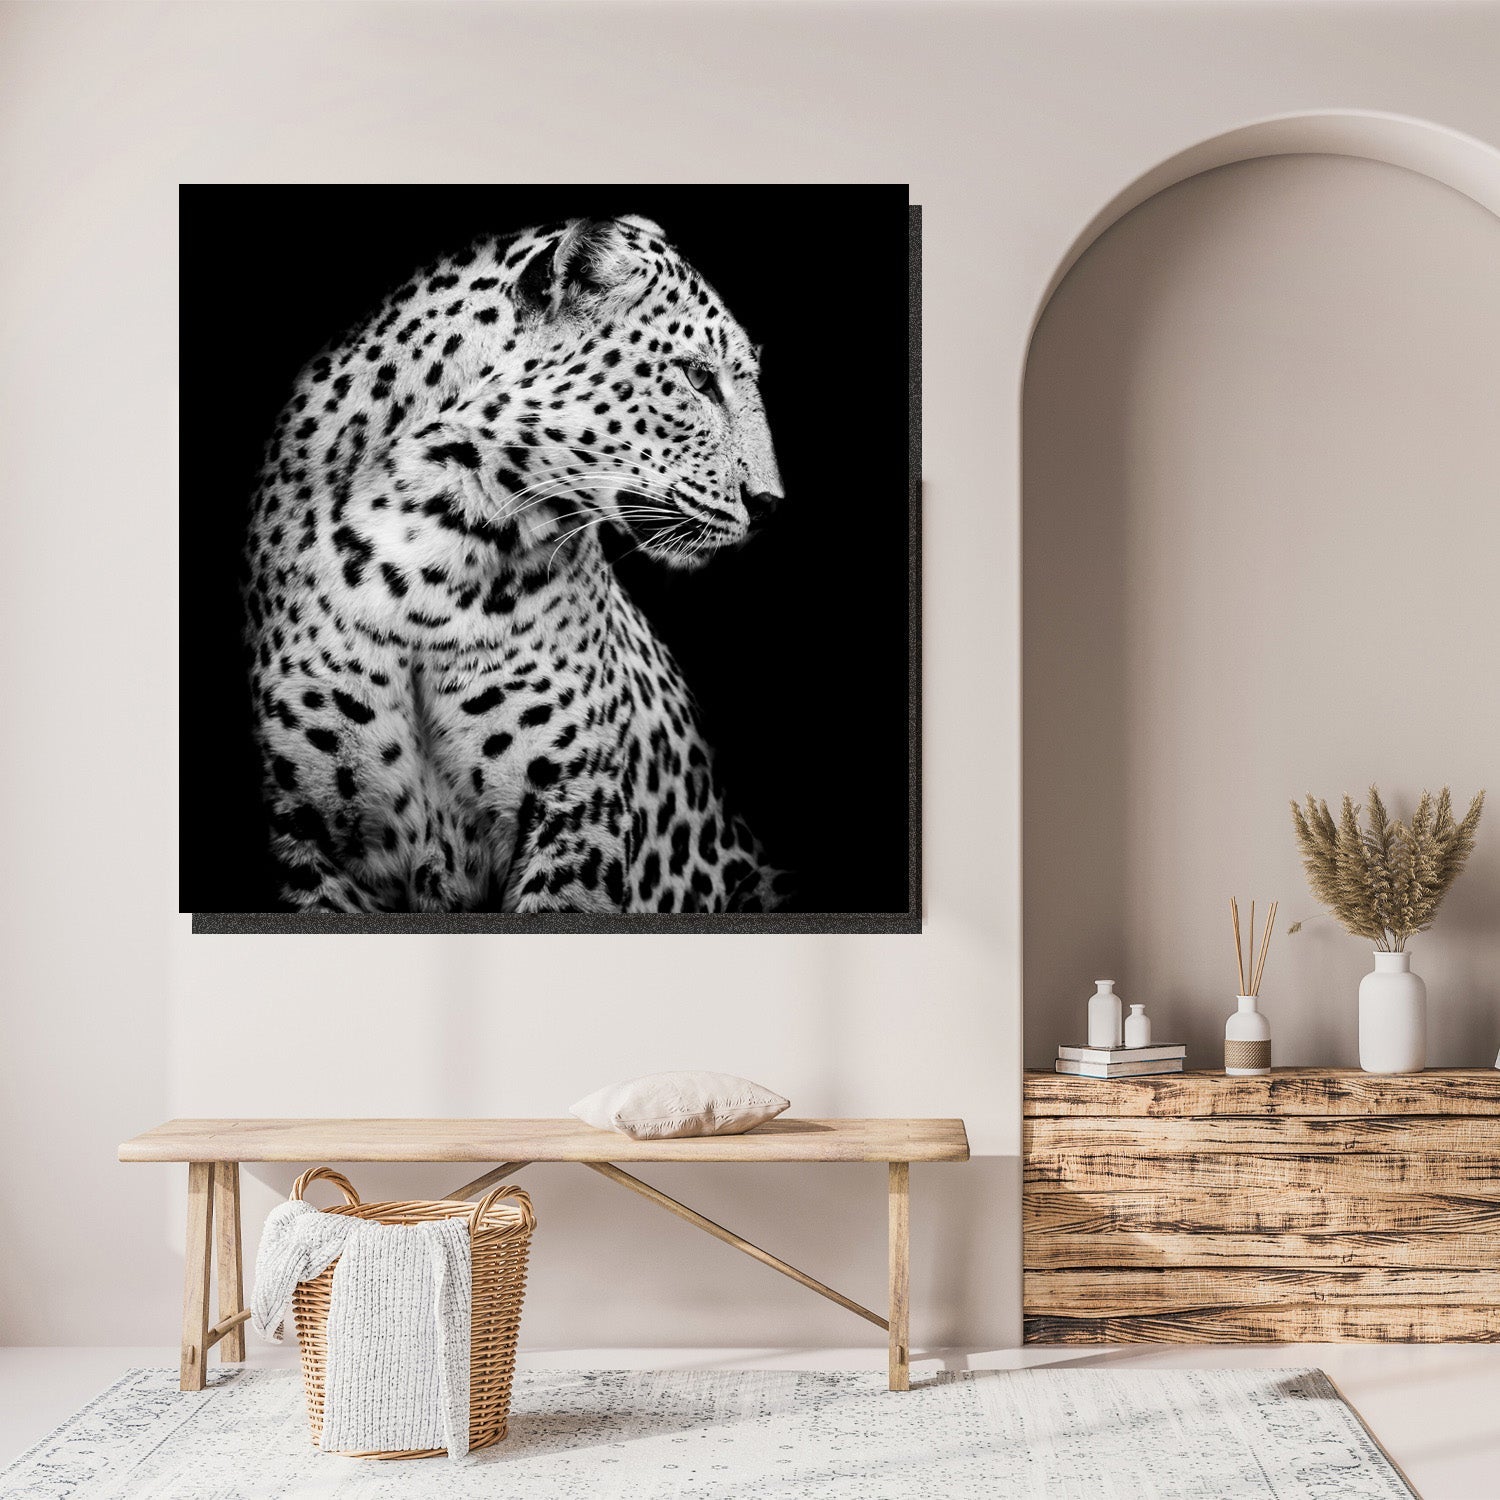 https://cdn.shopify.com/s/files/1/0387/9986/8044/products/LeopardSideViewCanvasArtprintStretched-4.jpg